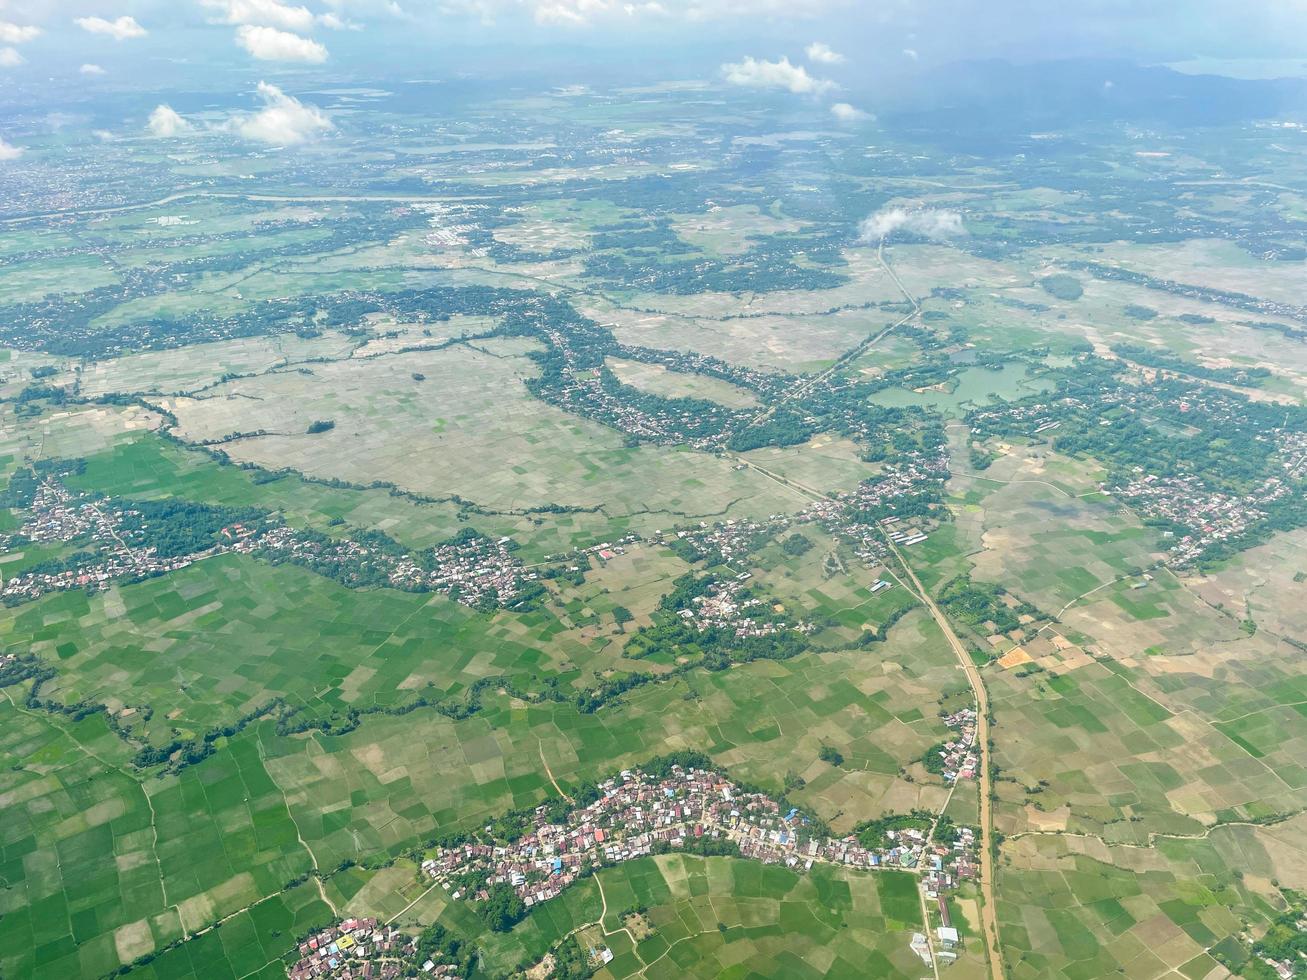 The aerial landscape shows a green view of the city. Streets, rice fields, and village houses. photo